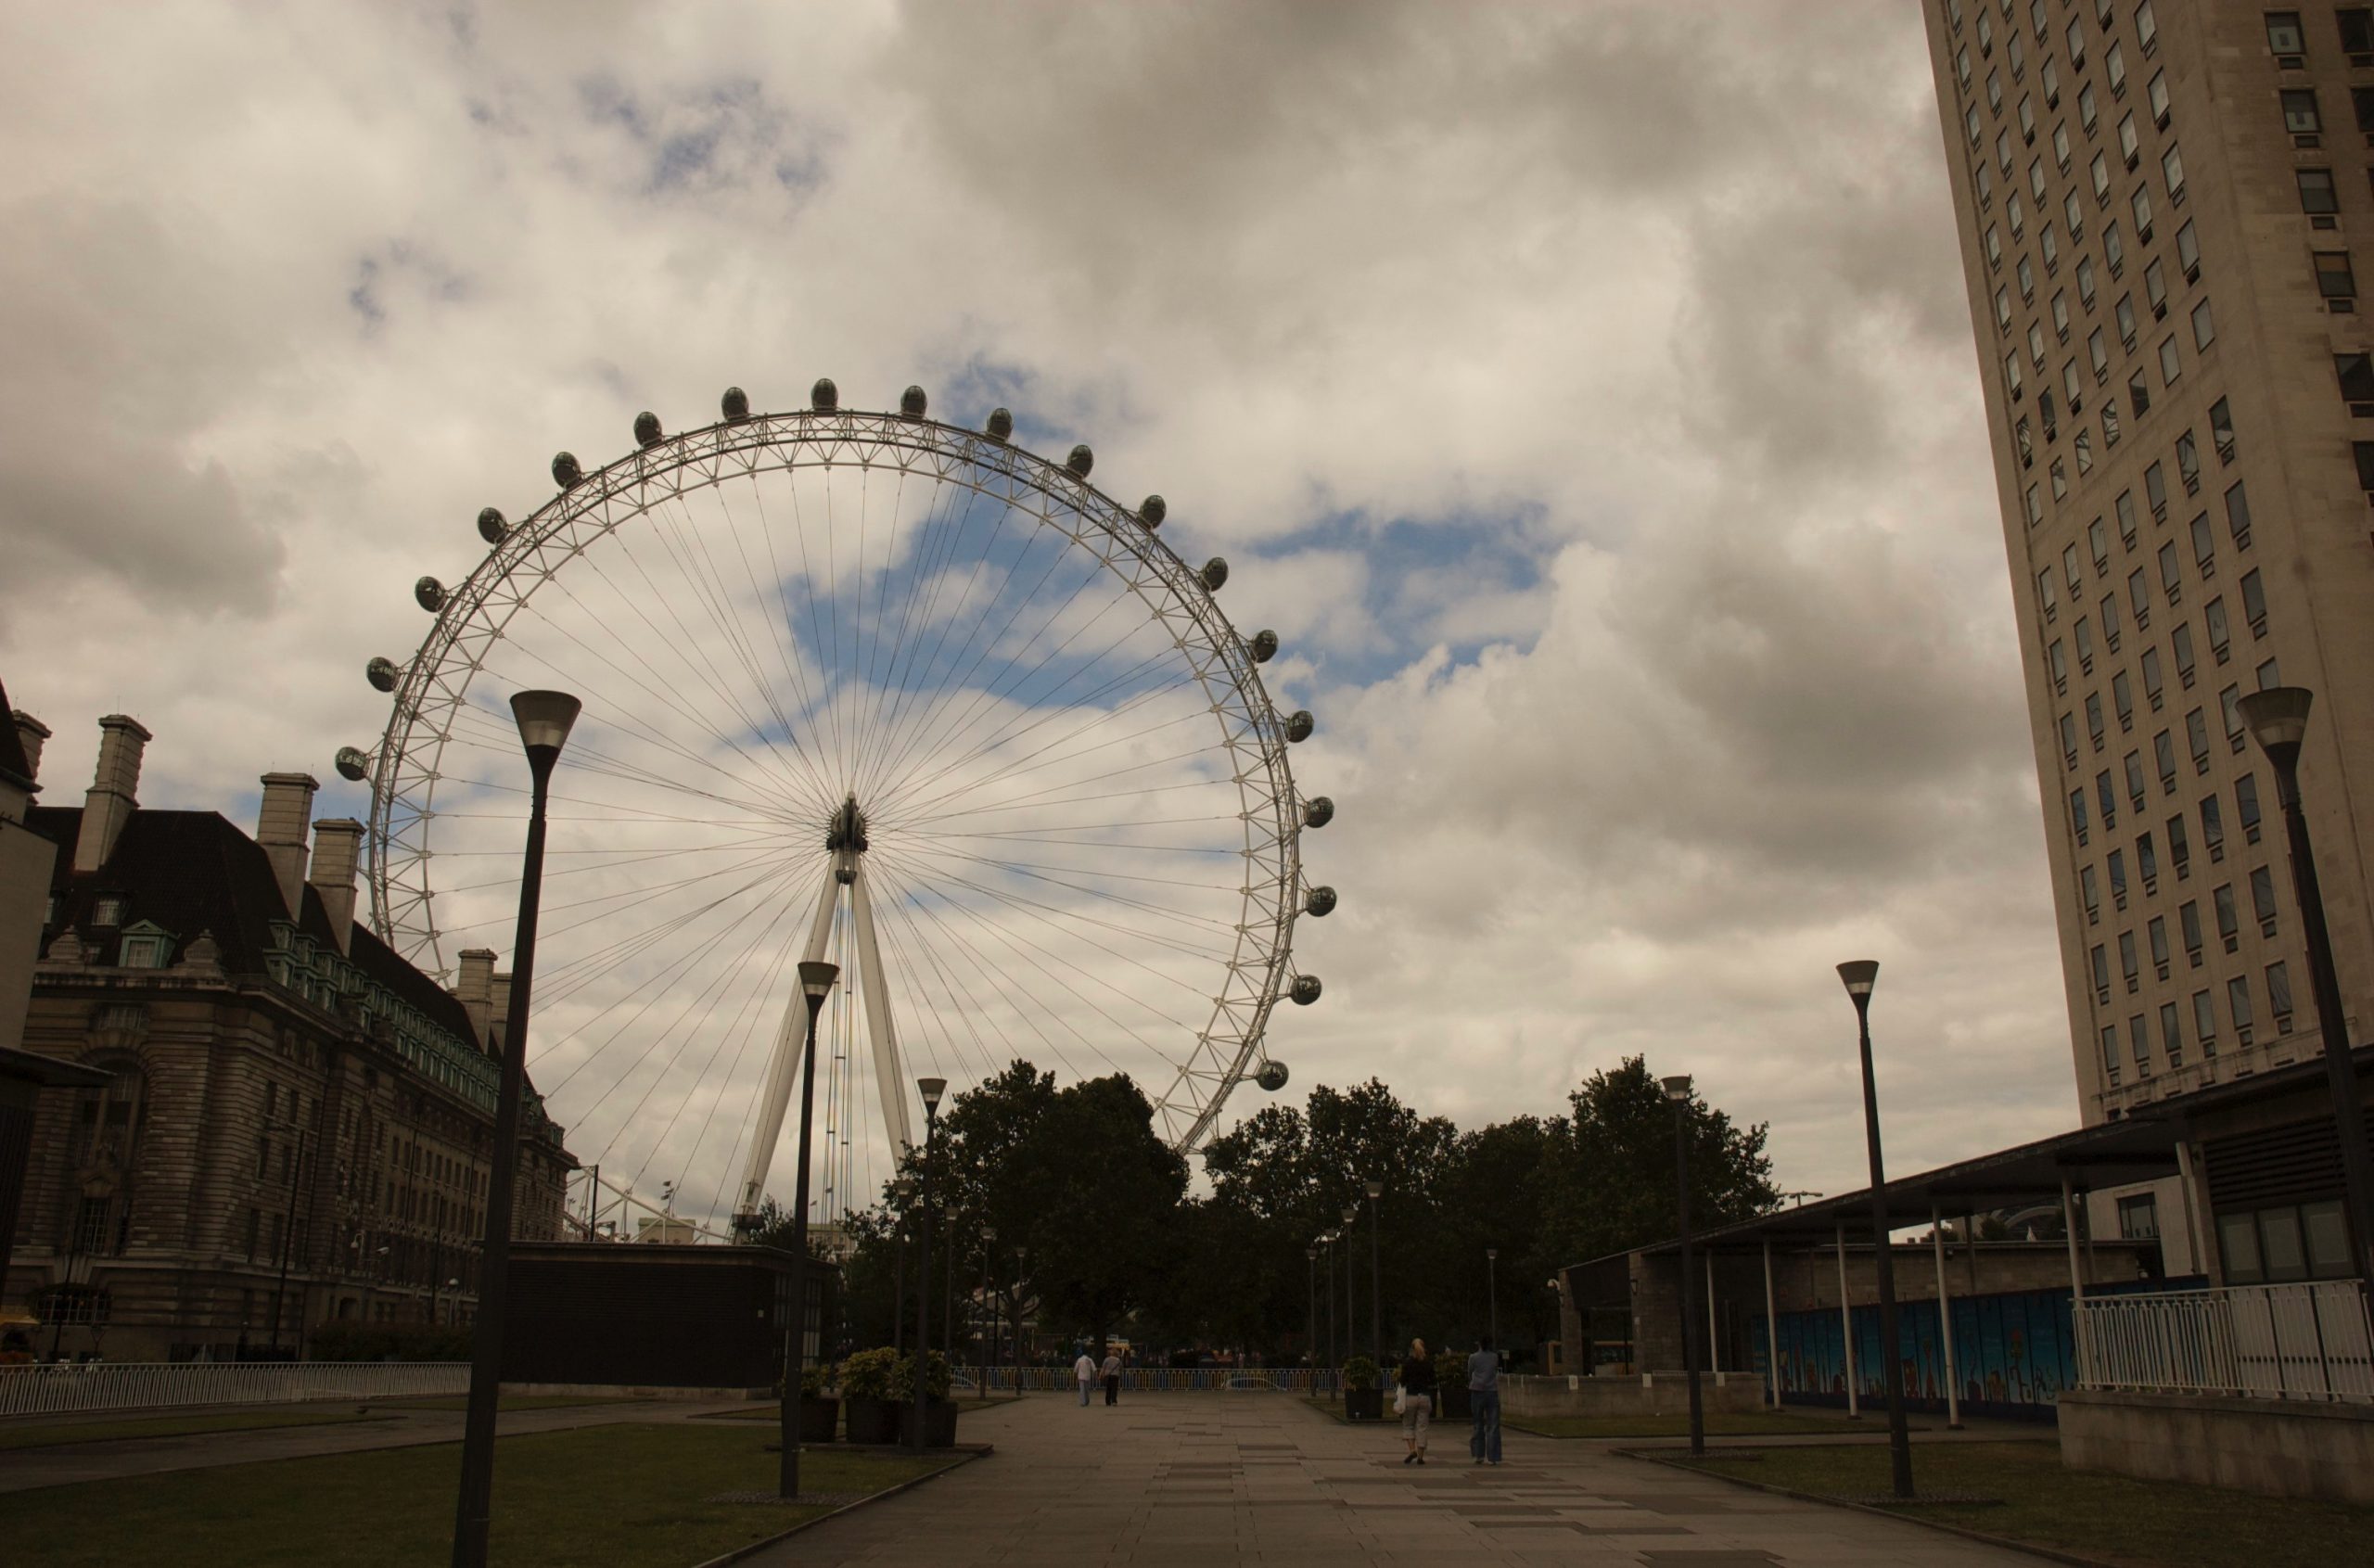 The London Eye can be seen from miles away.